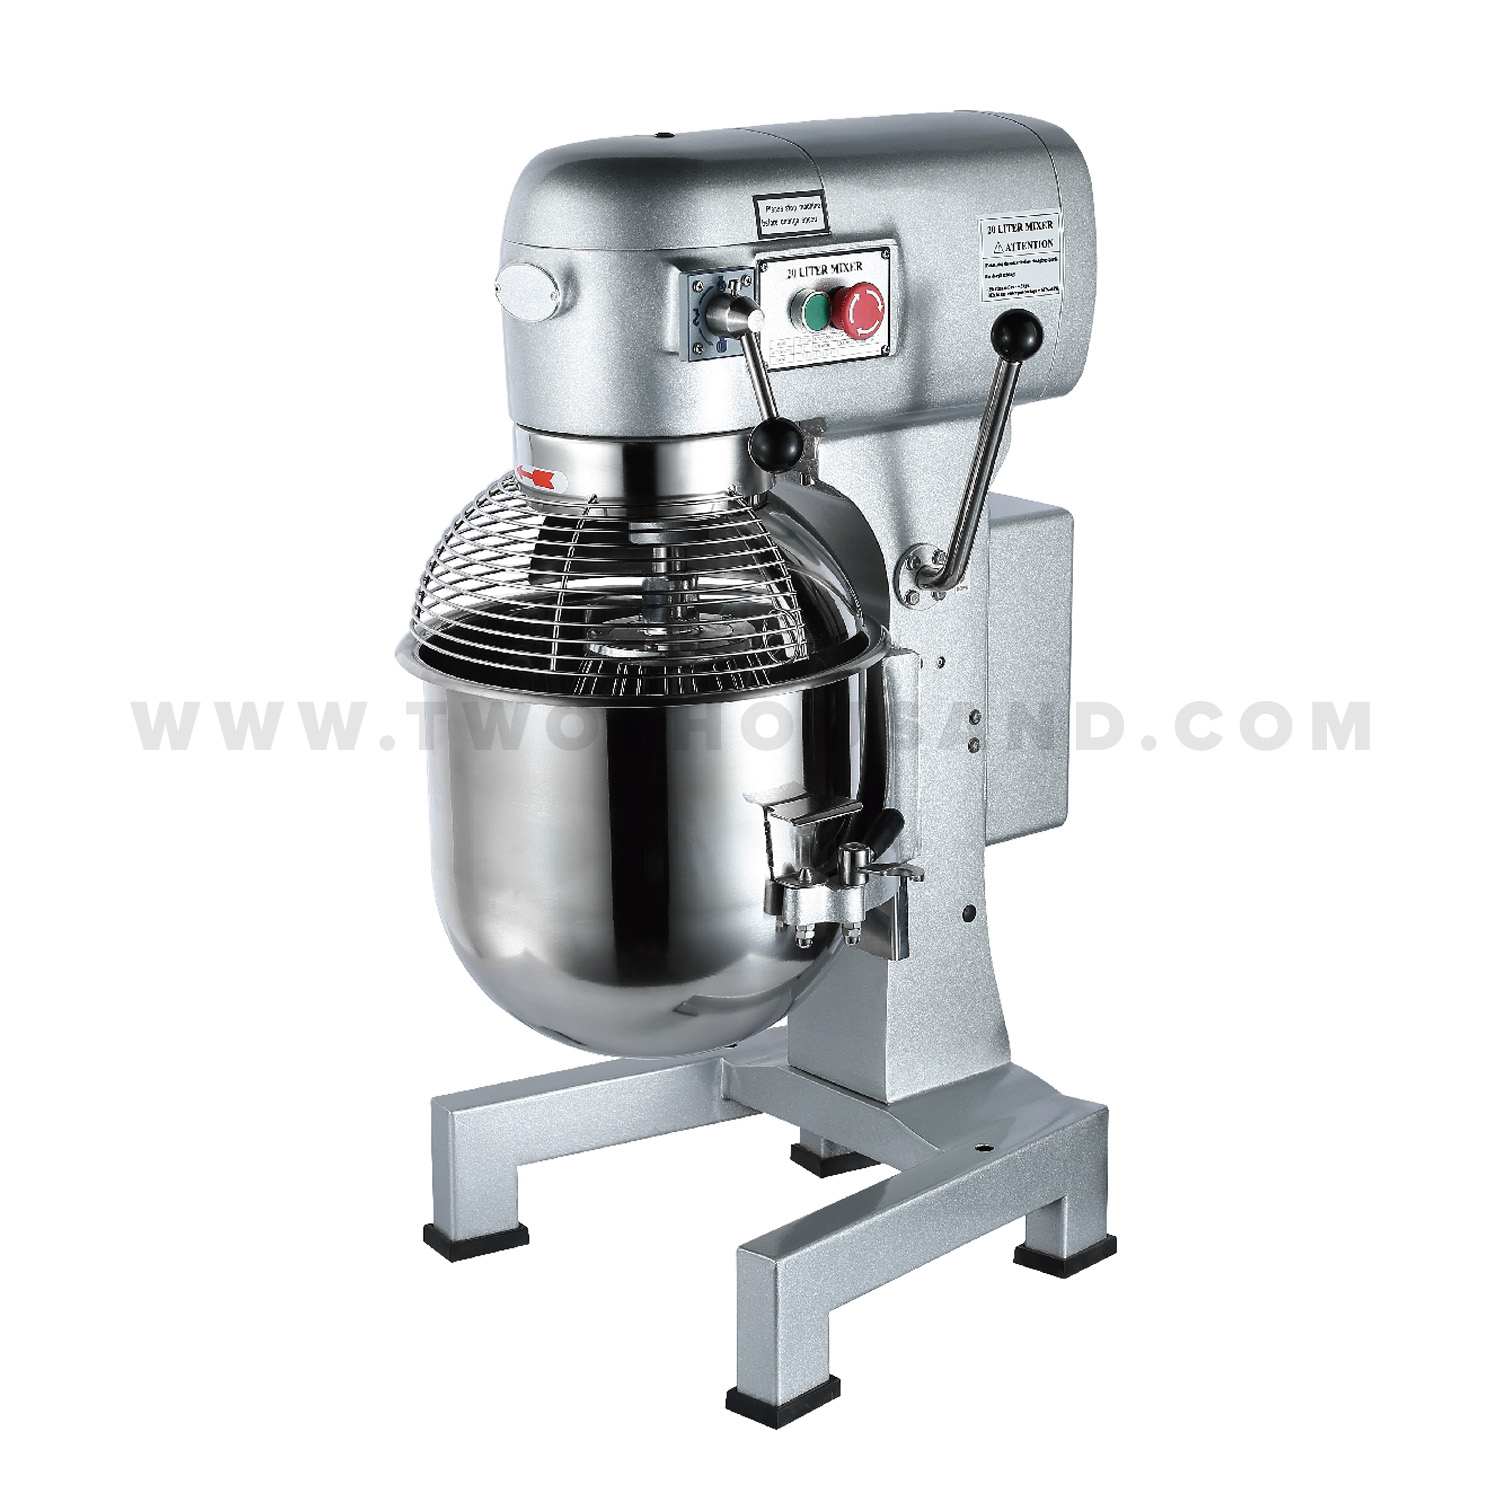 25L Gear Transmission CE with Safety Guard Planetary Food Mixer